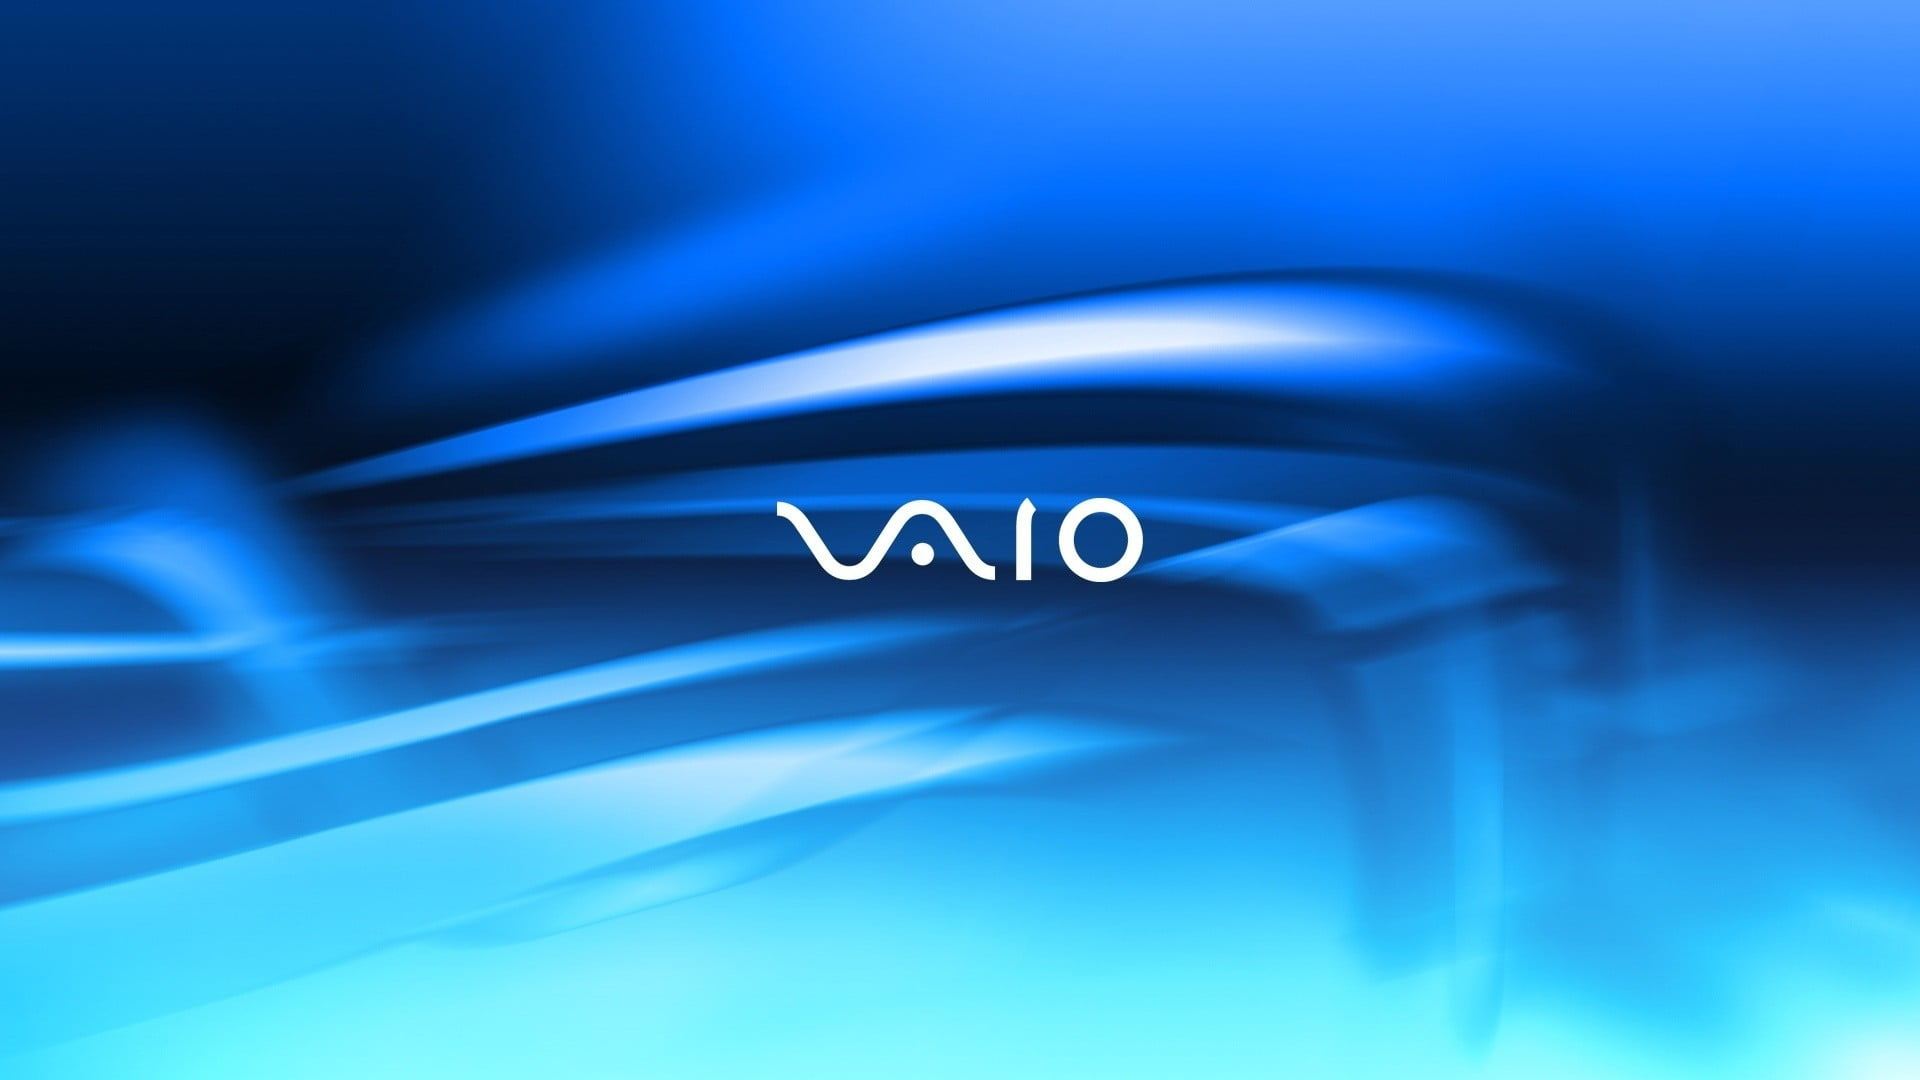 1920x1080 Black and white electronic device, Sony, VAIO HD wallpaper